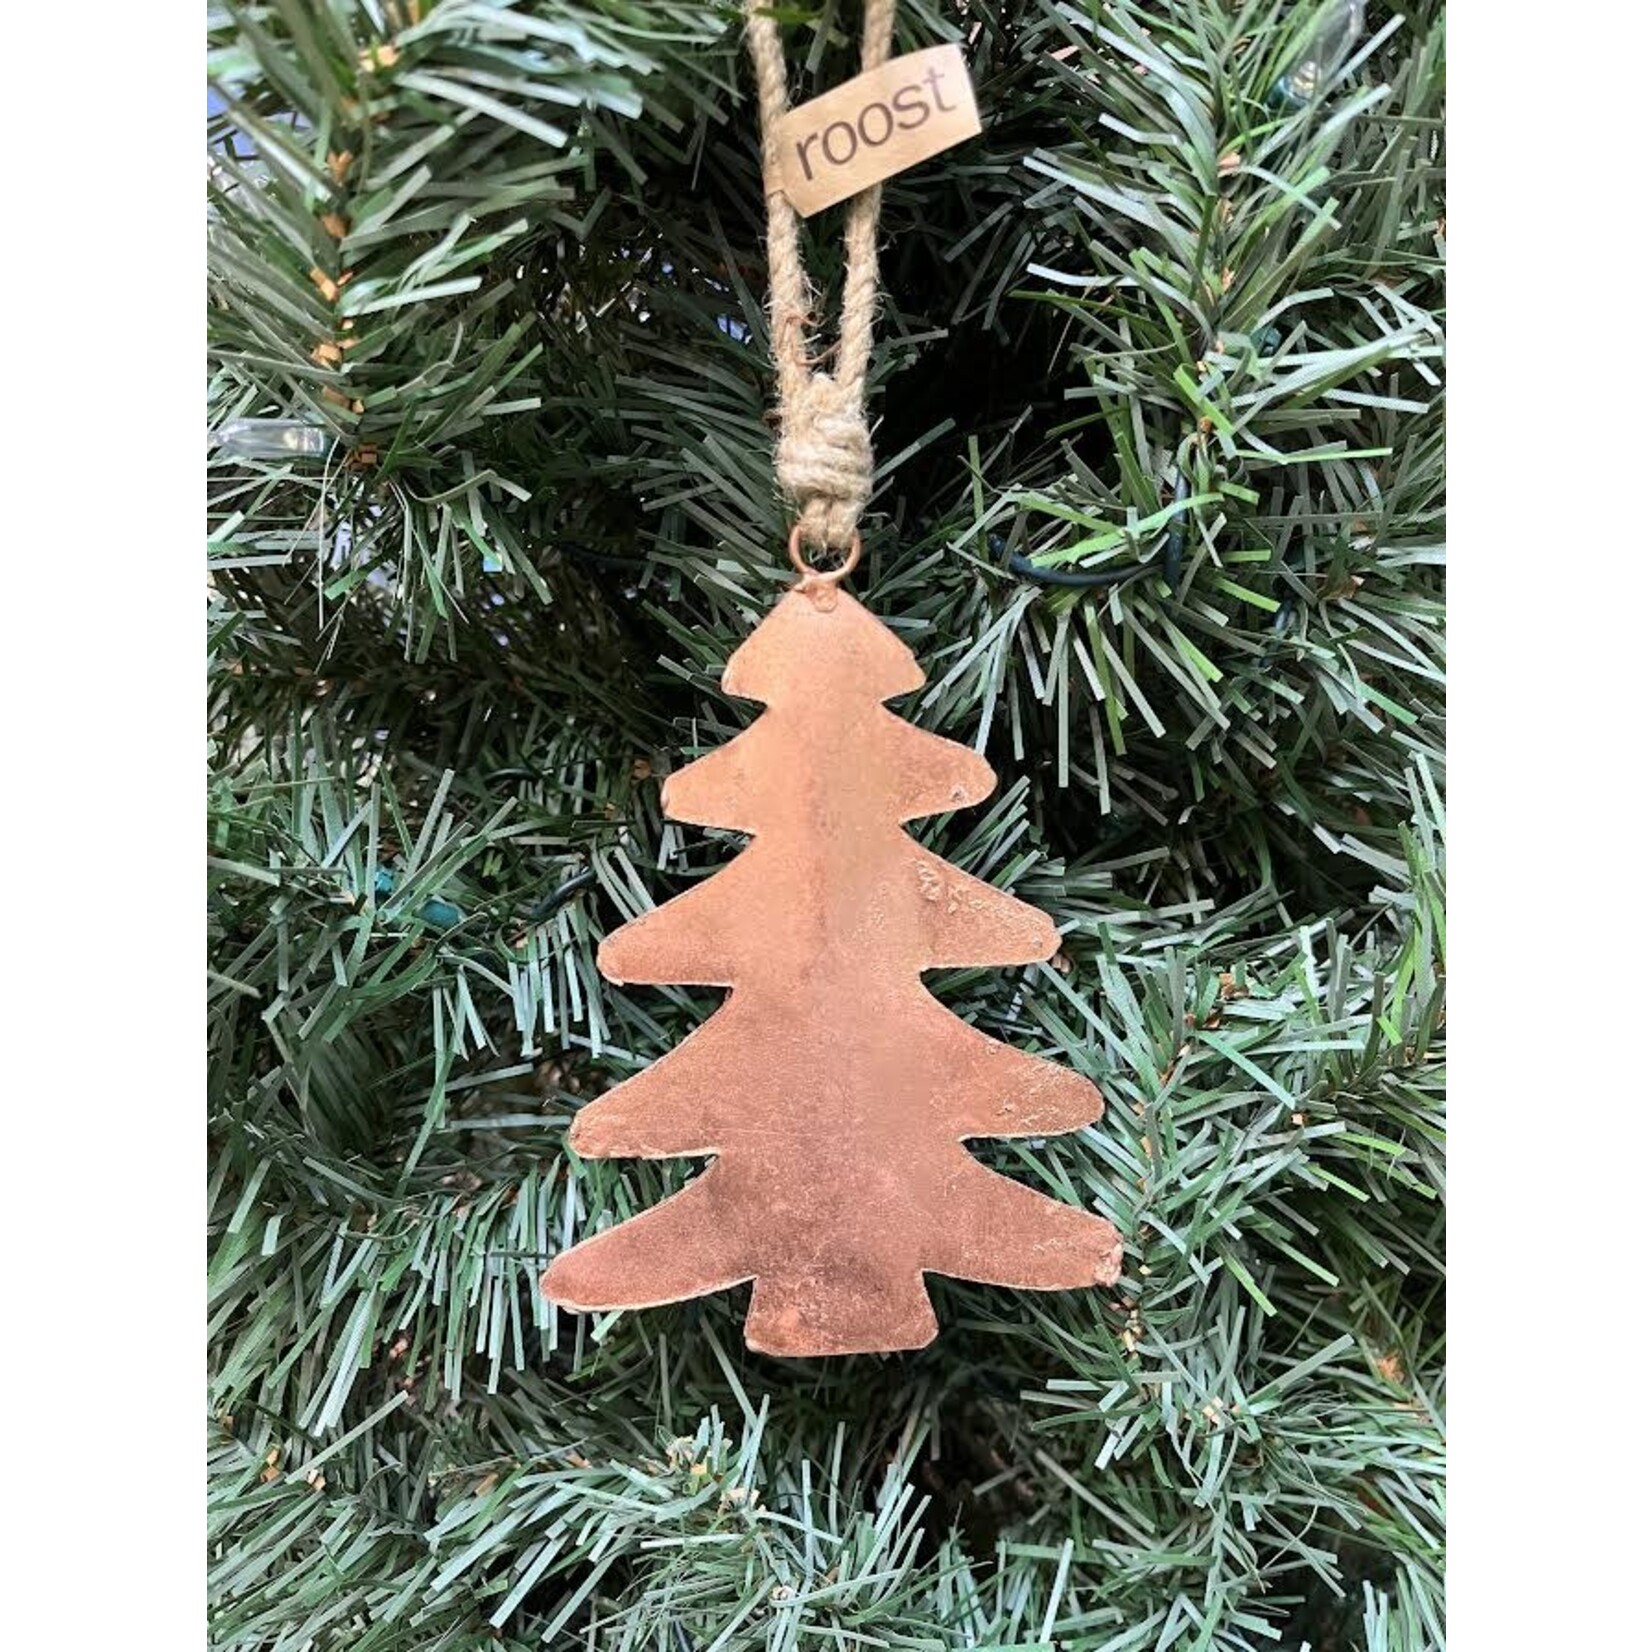 Roost Rustic Tree Ornament